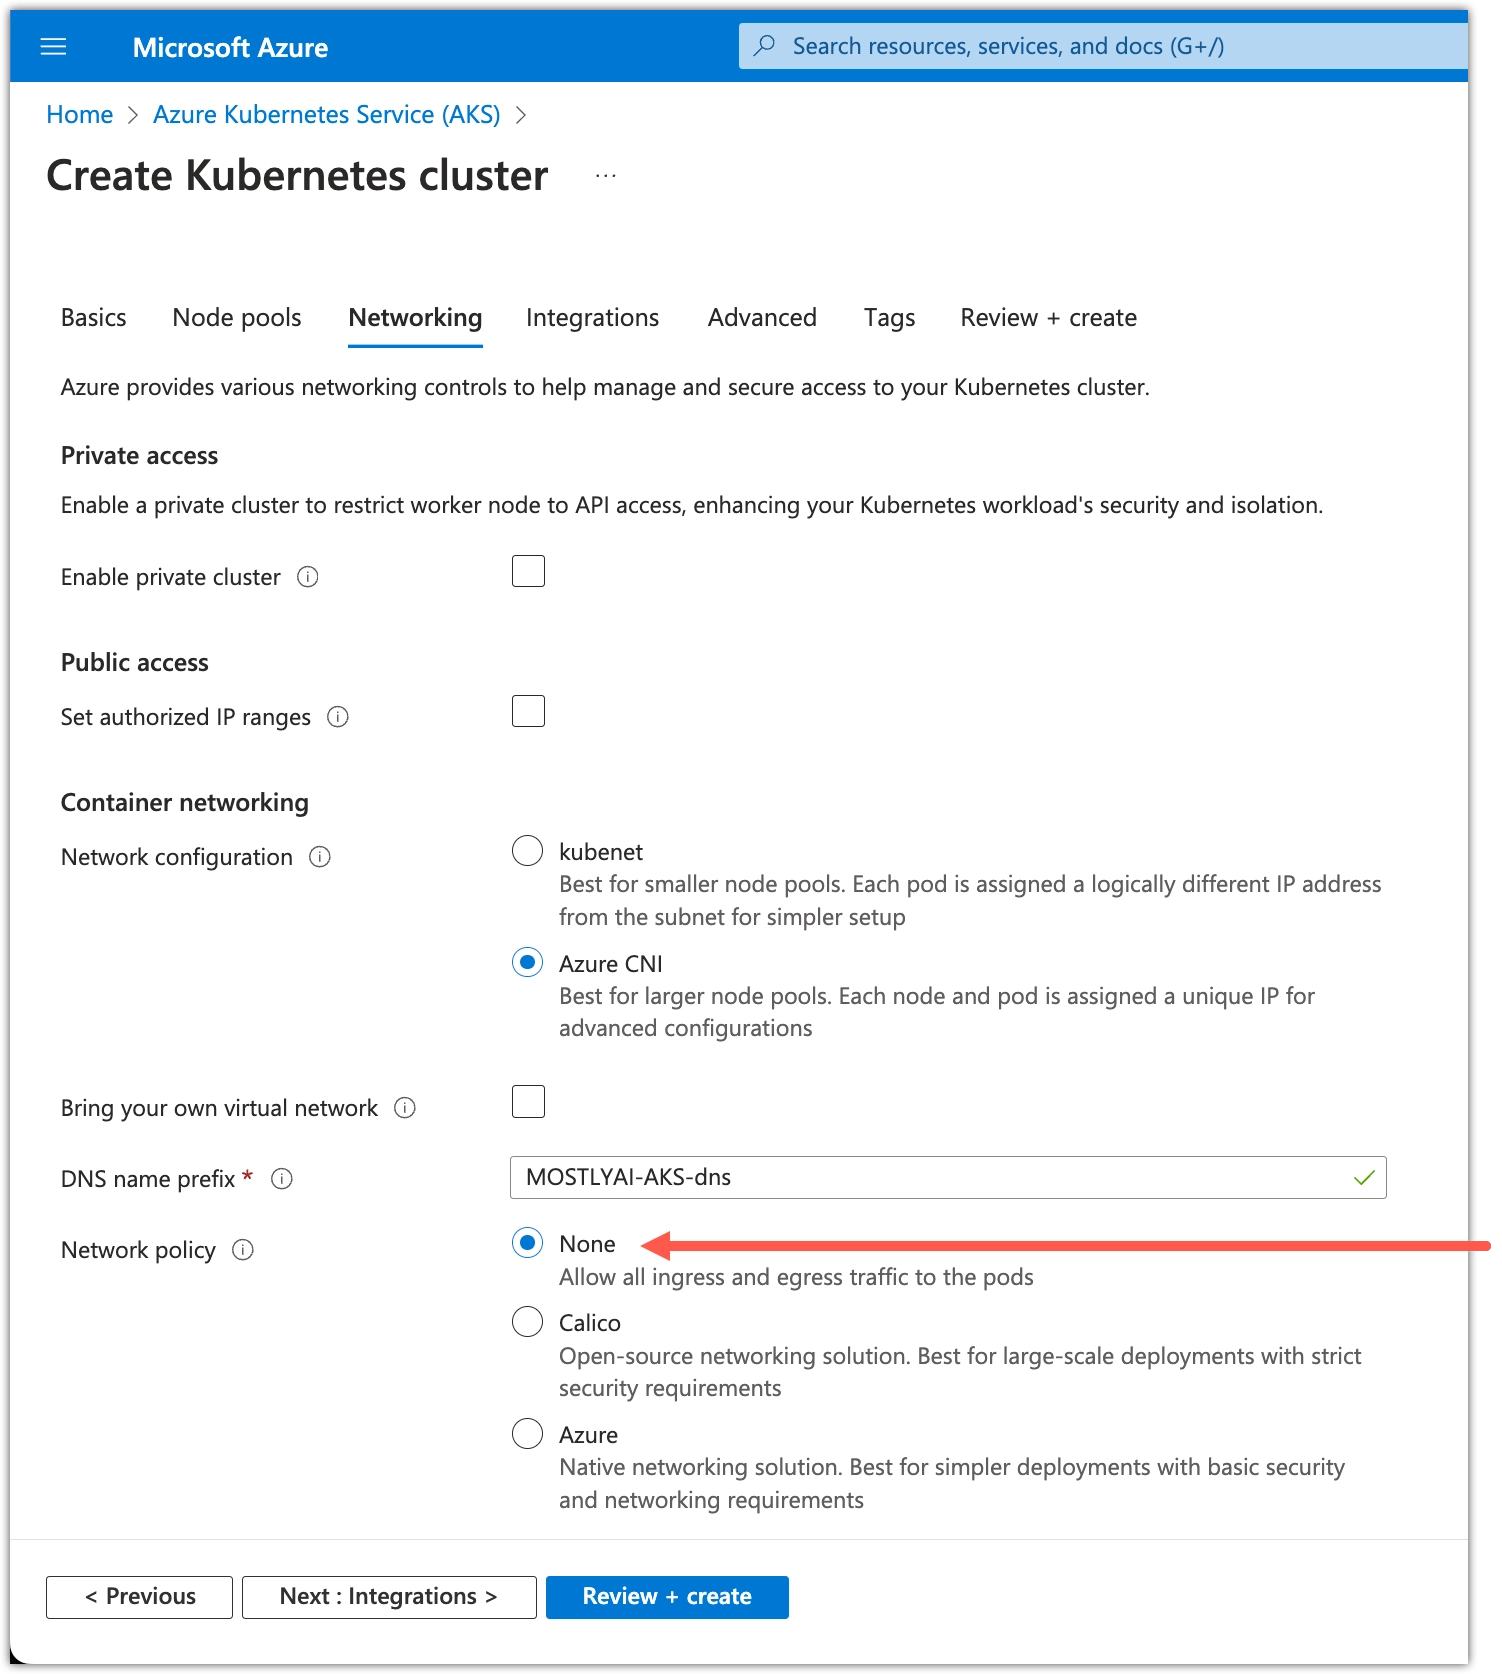 Azure - Select Network policy - None